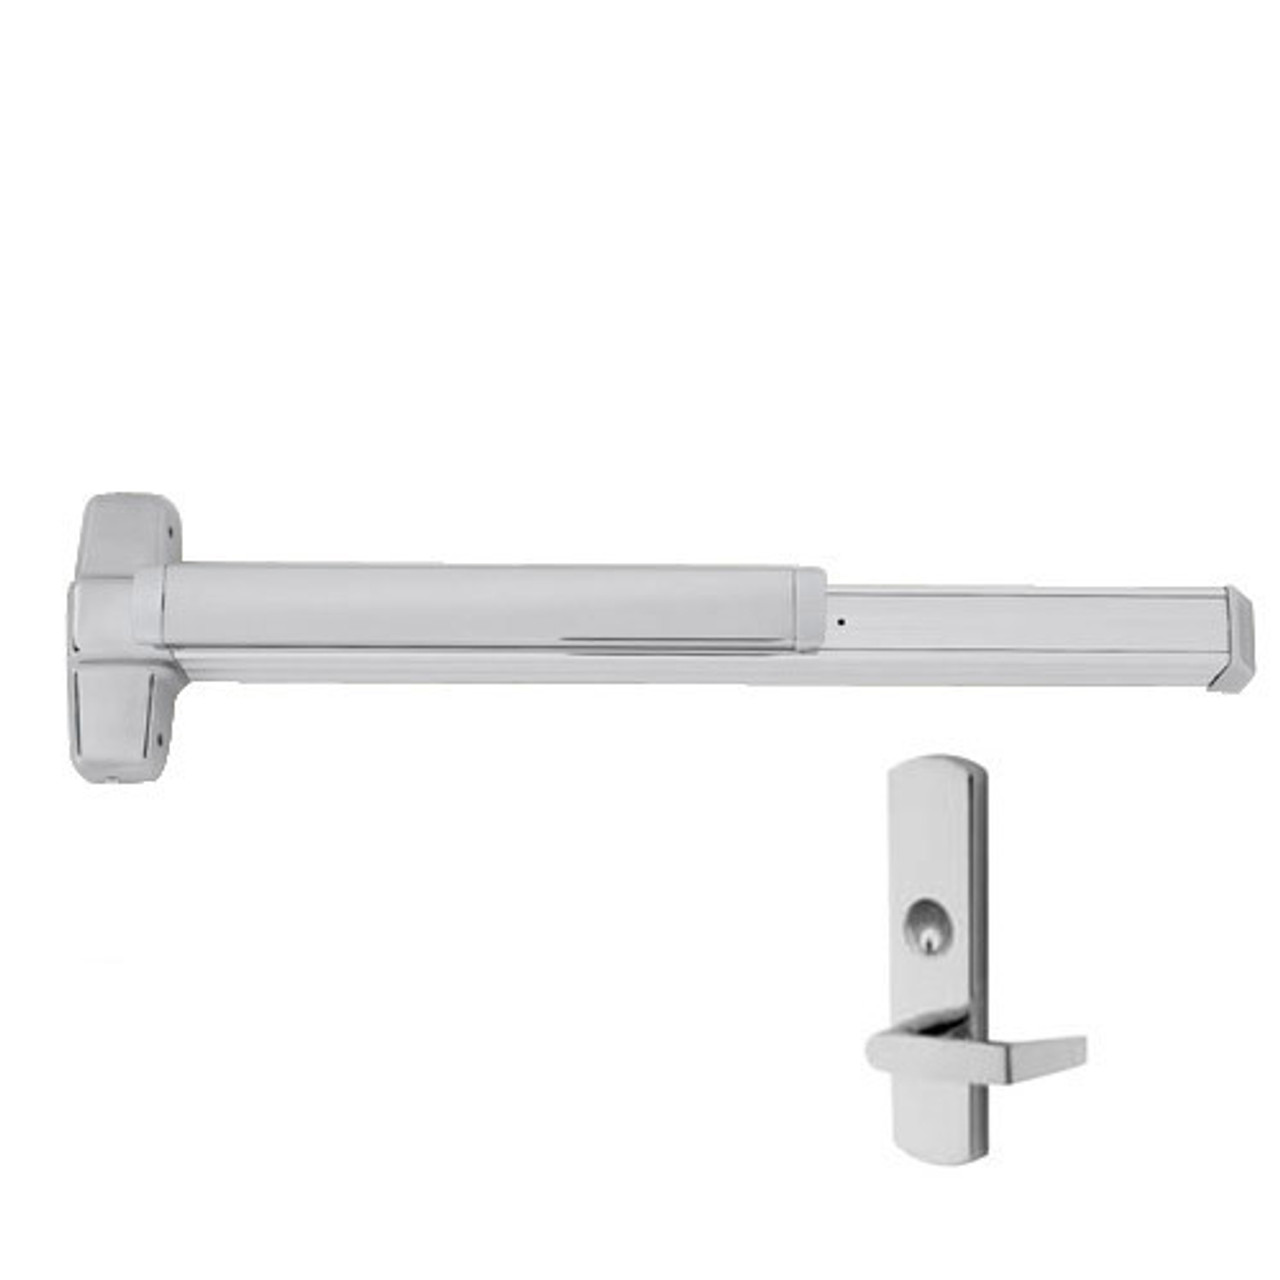 EL9847WDC-L-US32D-3-RHR Von Duprin Exit Device with Electric Latch Retraction in Satin Stainless